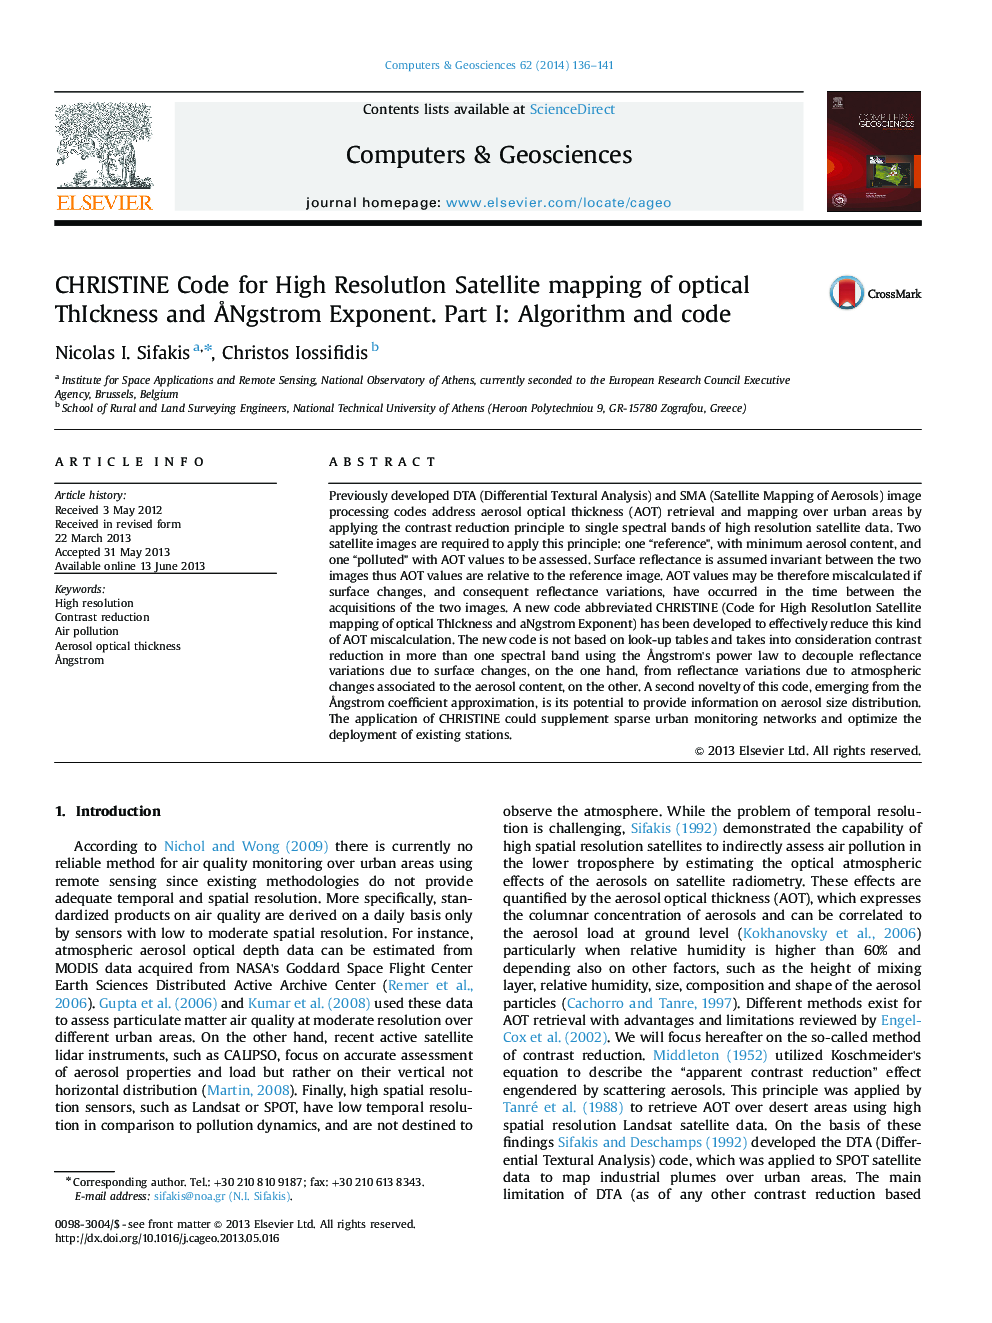 CHRISTINE Code for High ResolutIon Satellite mapping of optical ThIckness and ÃNgstrom Exponent. Part I: Algorithm and code